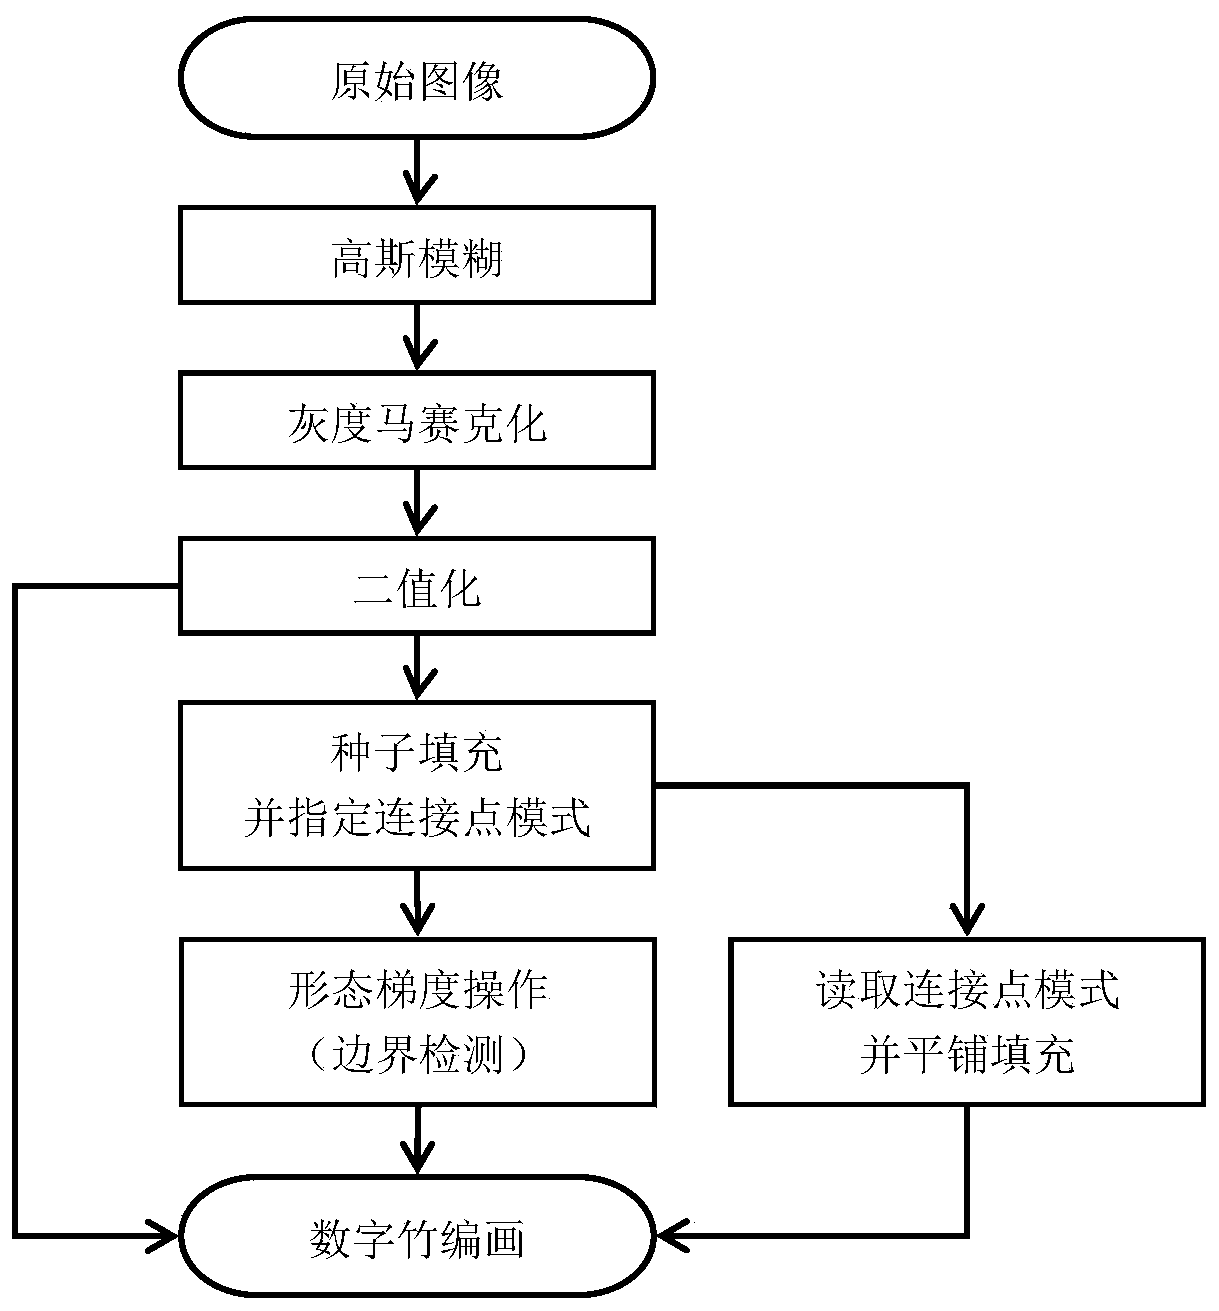 Image-based digital bamboo-woven picture automatic generation method